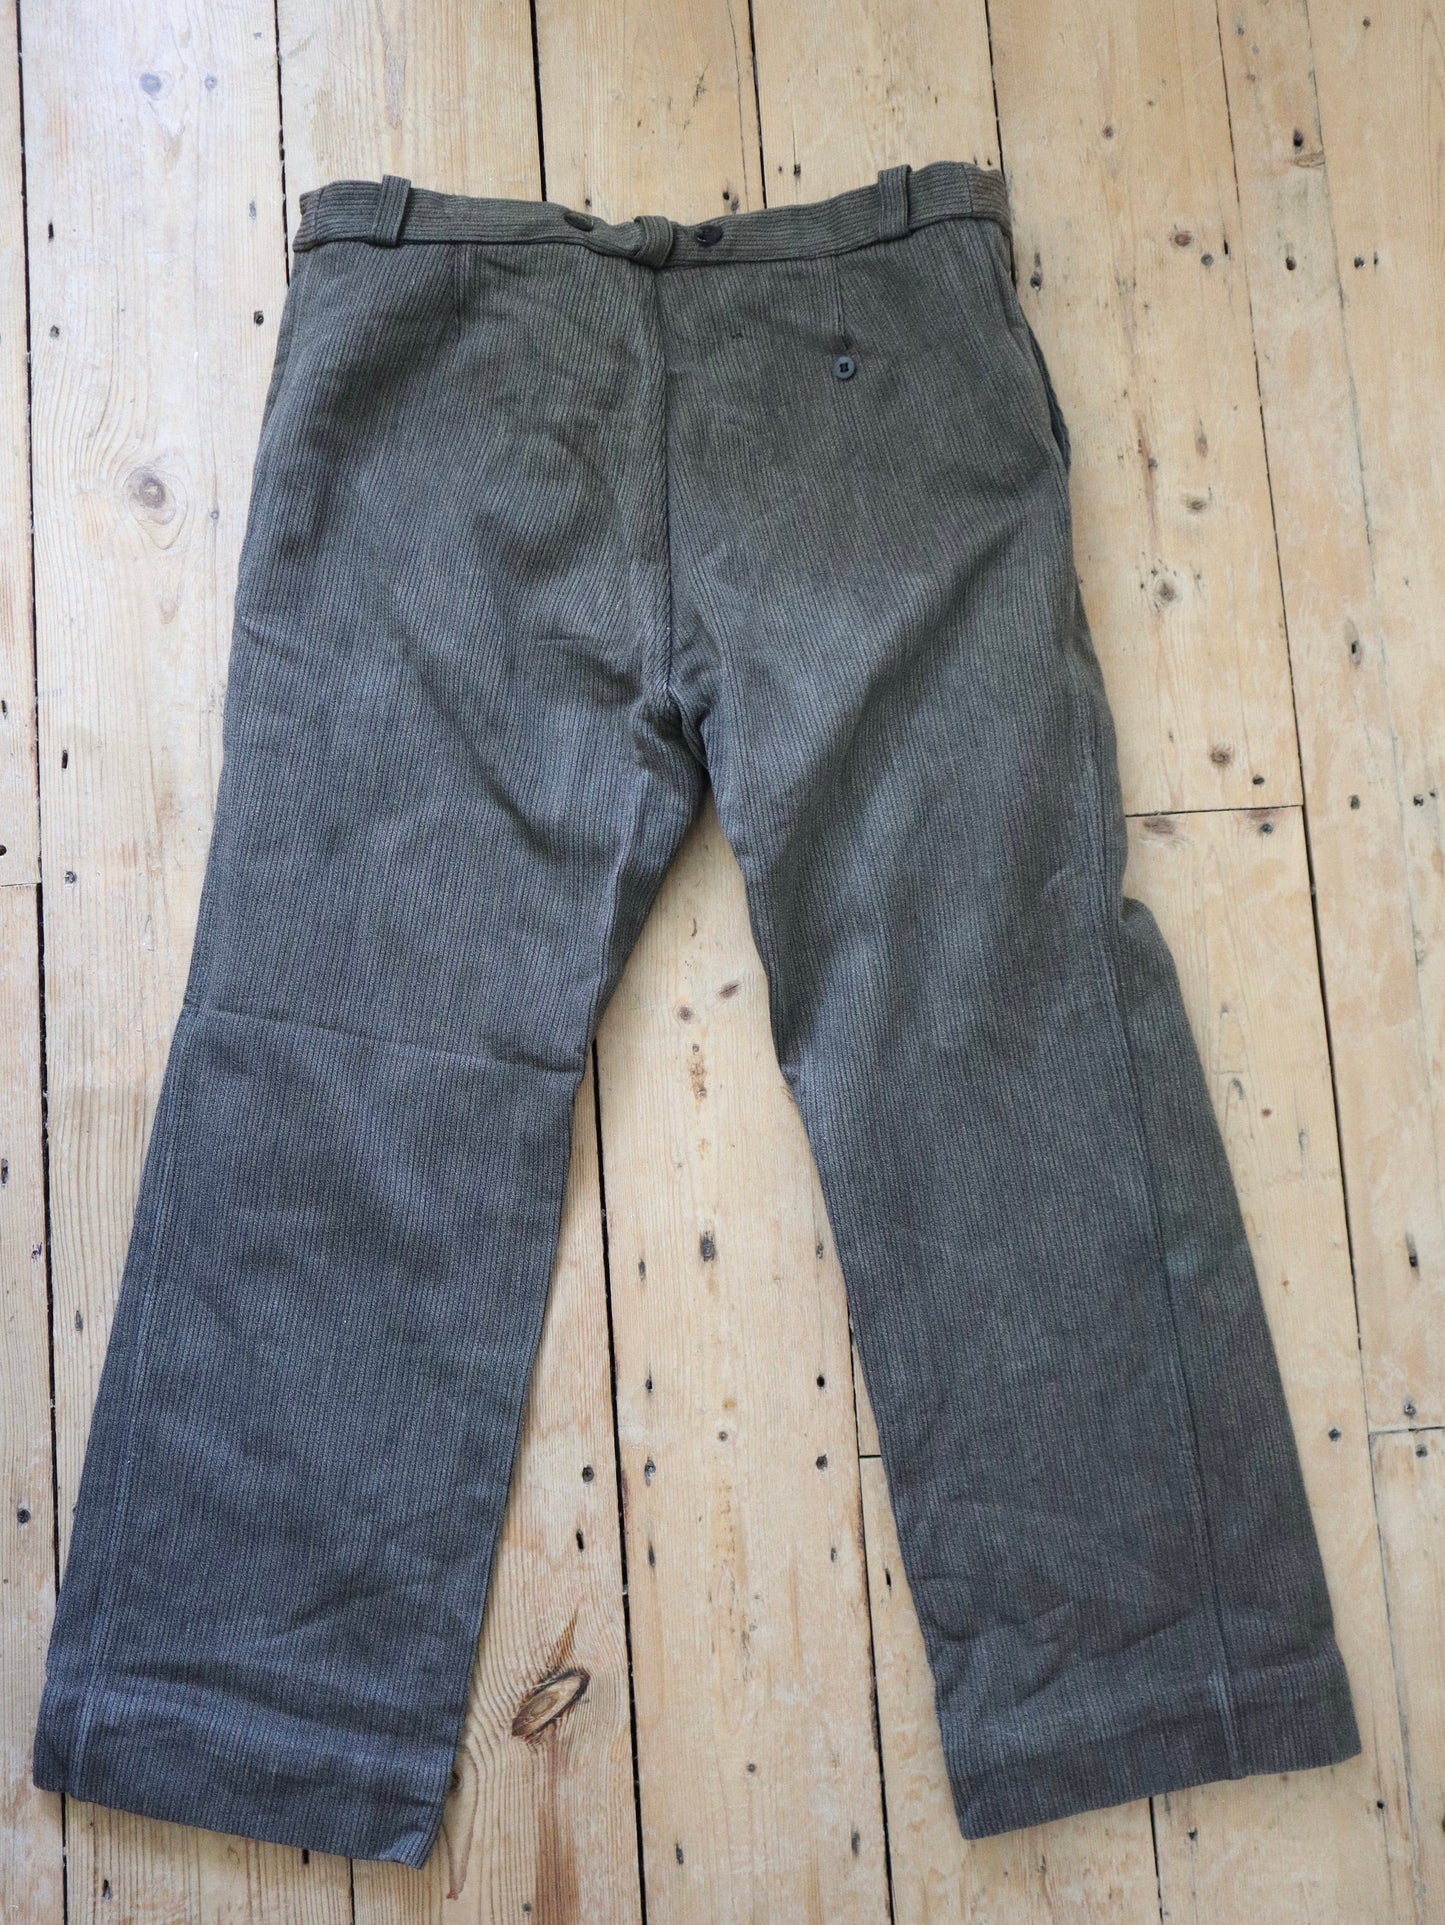 1950s French Workwear Trousers Brown Dumont D’Urville Pants